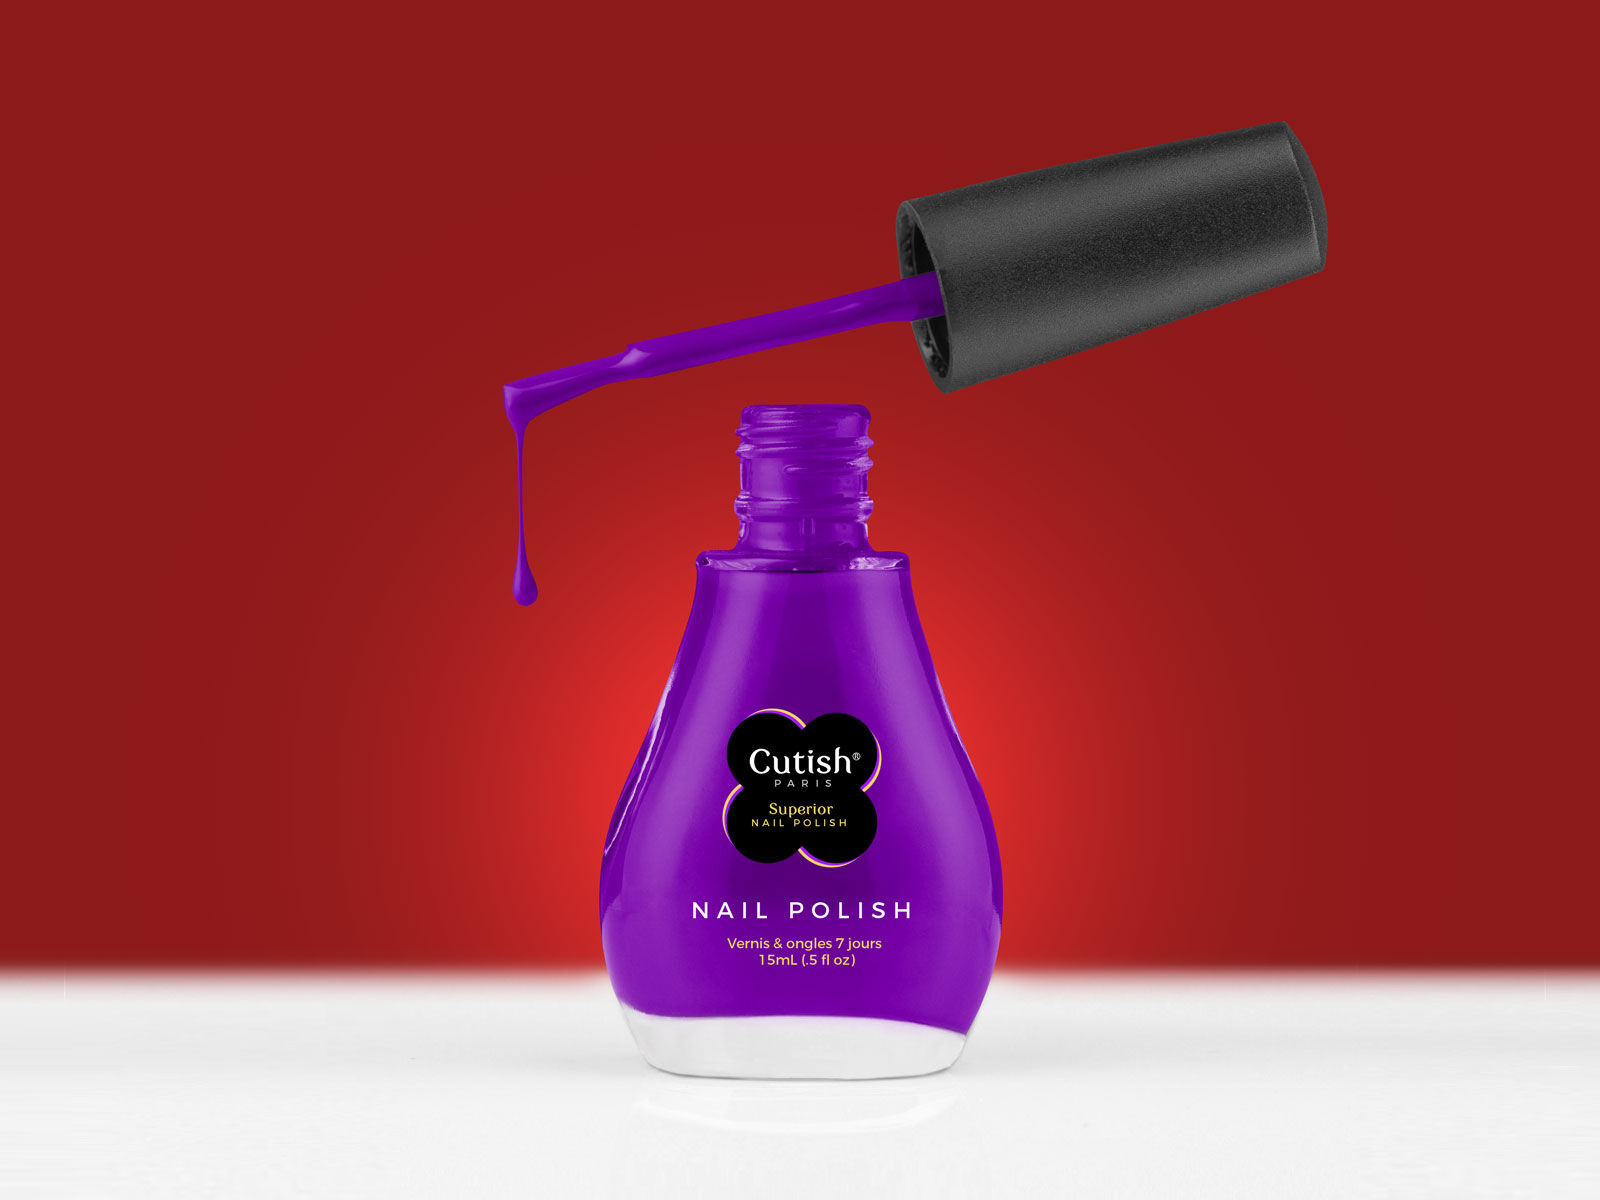 Small Glass Nail Polish Bottle With Blur Background Mockup FREE PSD